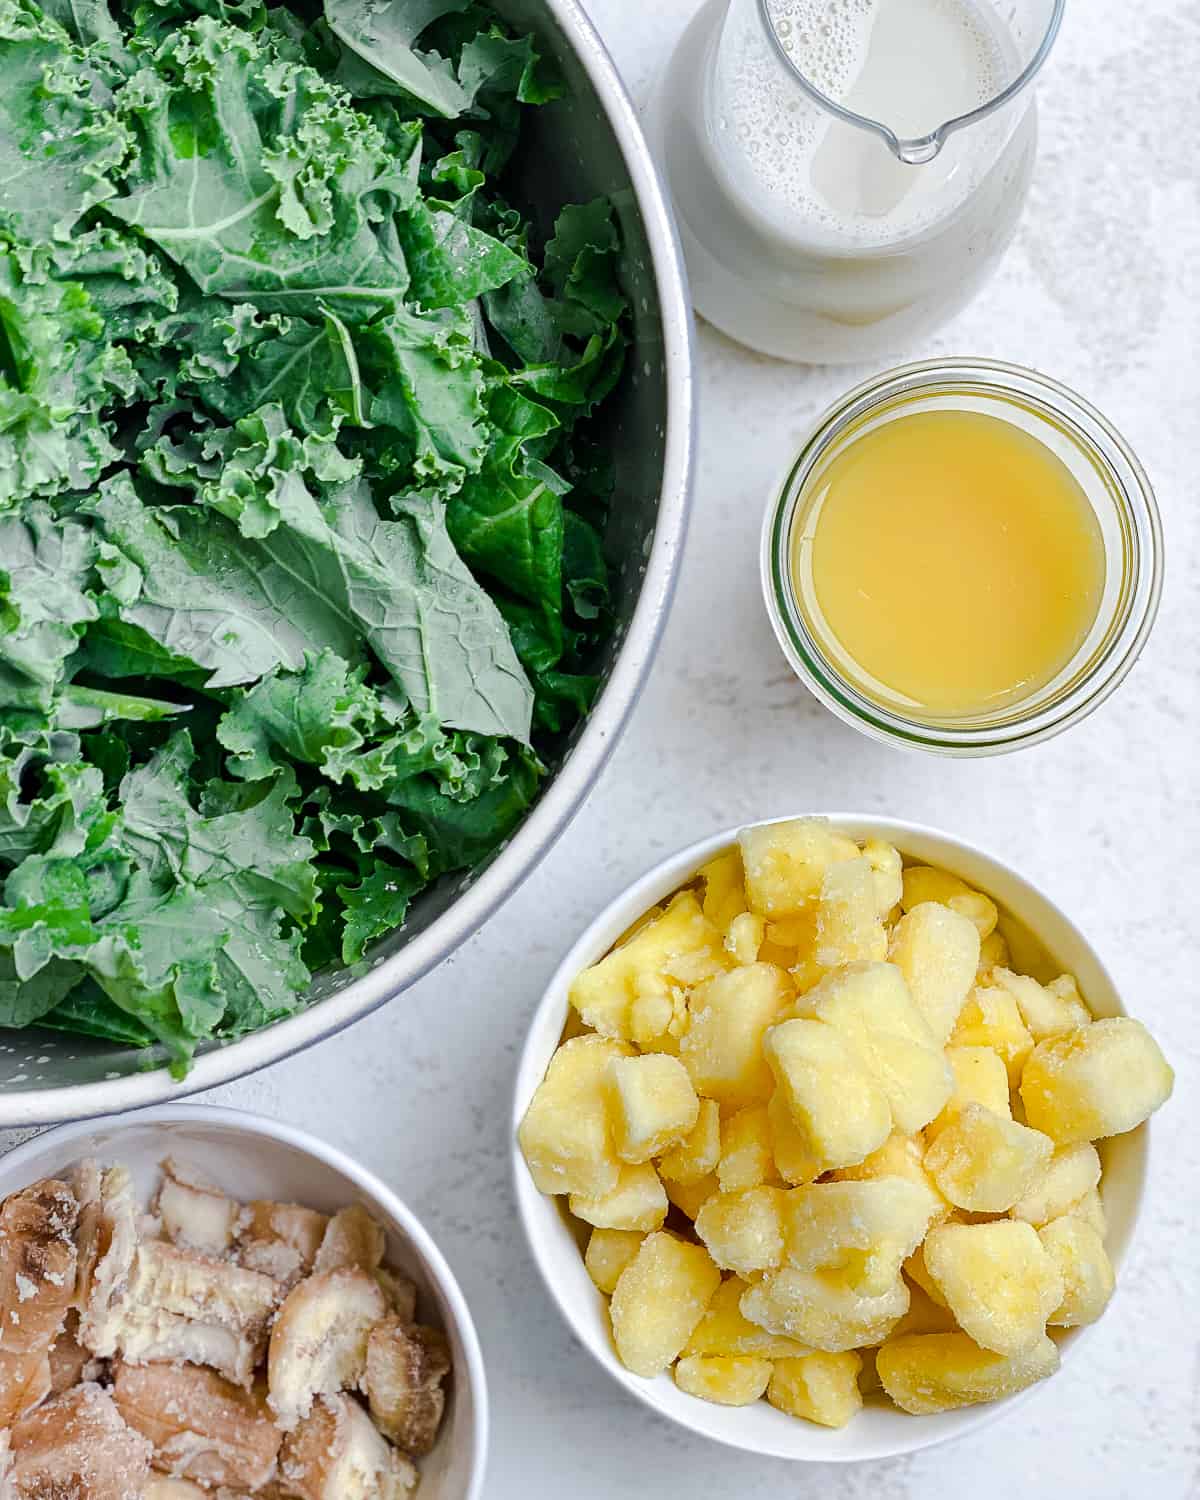 Ingredients for kale and pineapple smoothie measured on a white surface